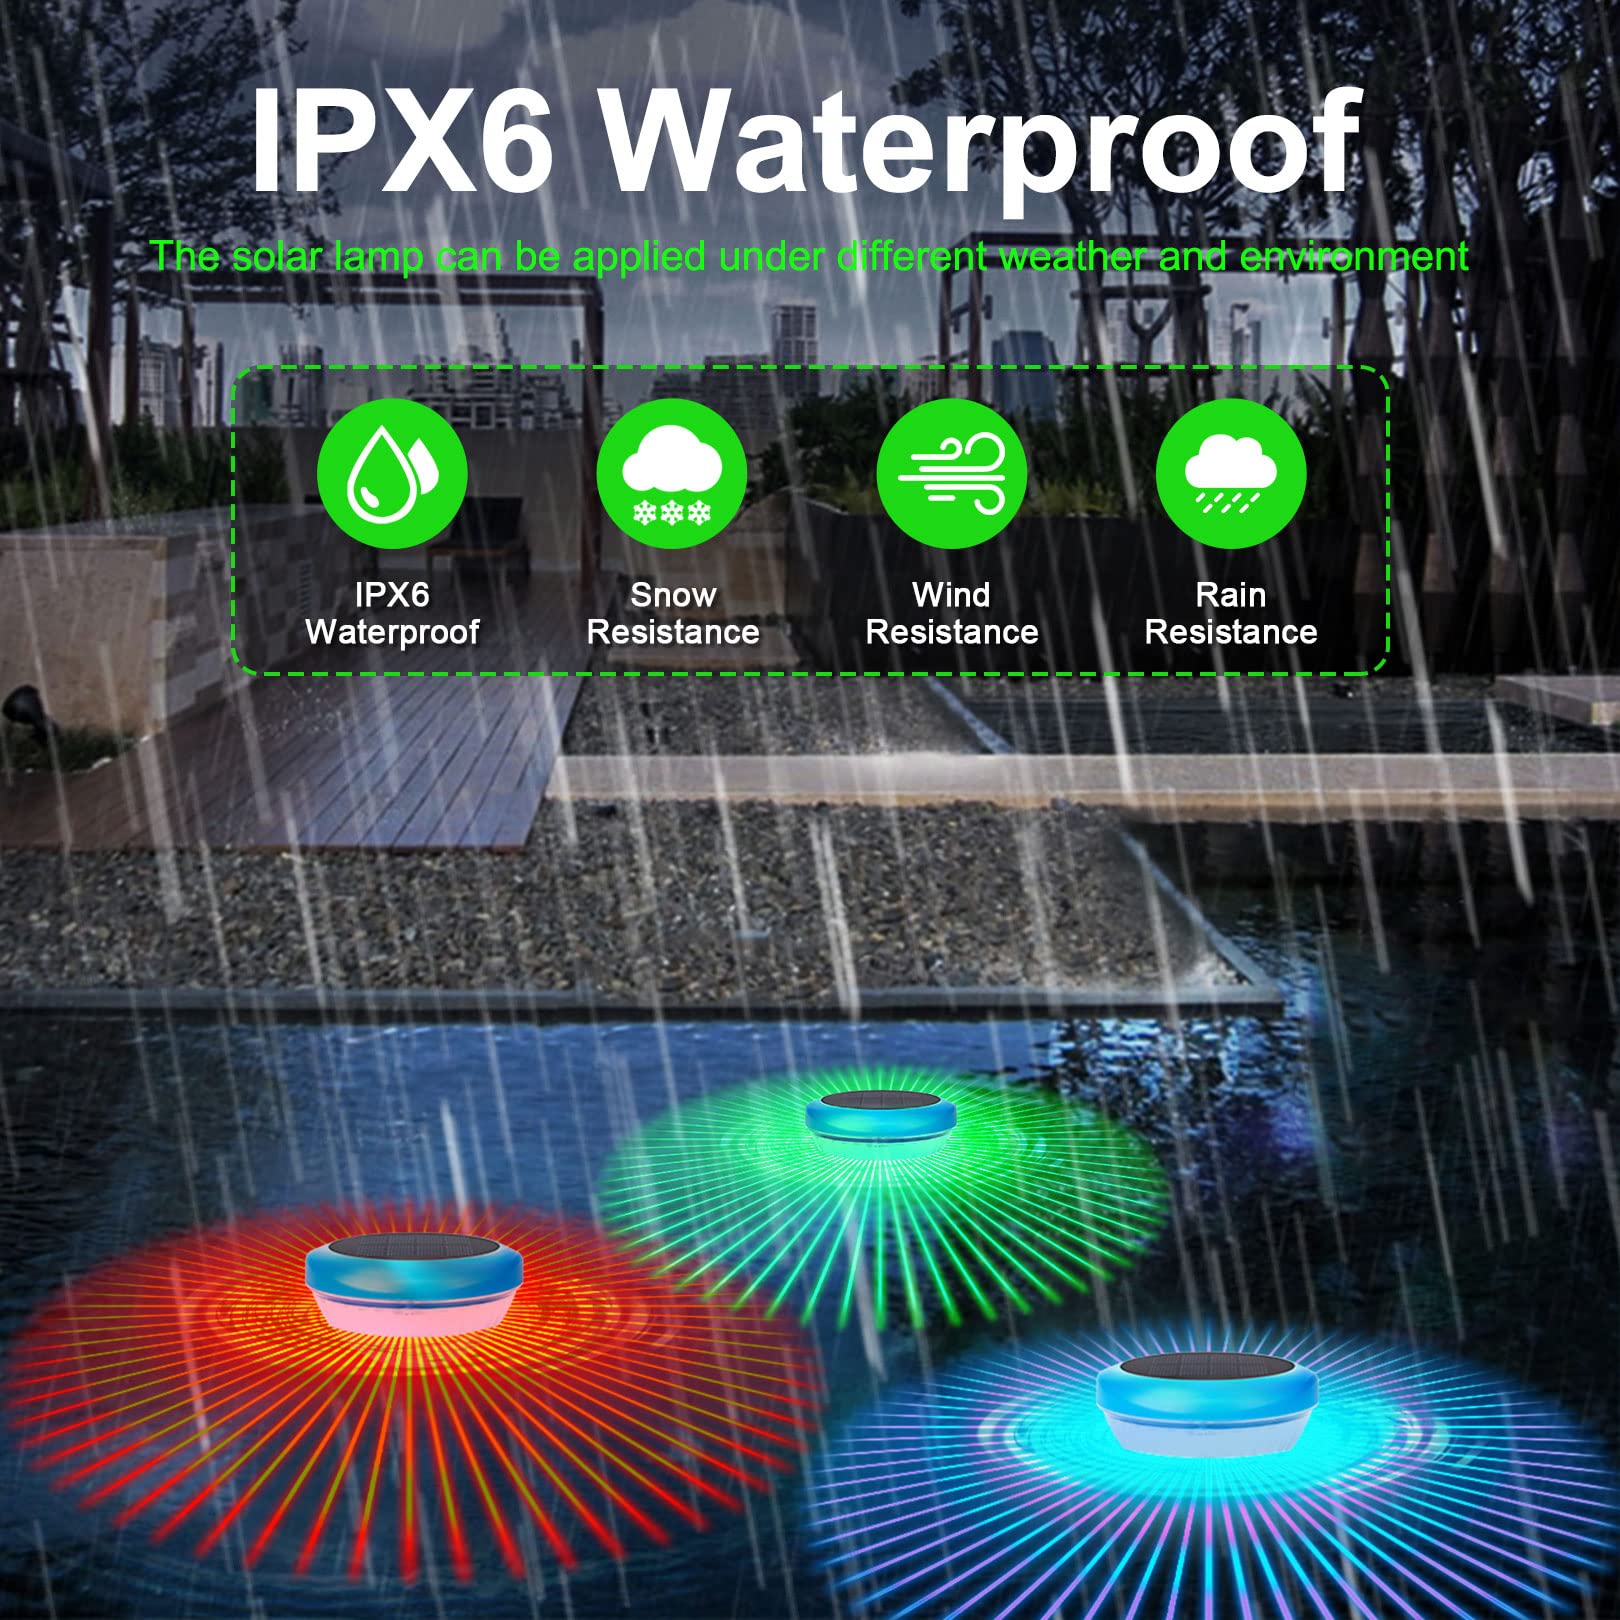 Solar Floating LED Pool Lights with RGB Color Changing Waterproof Solar pood Lights for Swimming Pool at Night,Outdoor LED Pool Lights That Float for Pool,Pond,Spa,Hot tub,Garden-4PACK